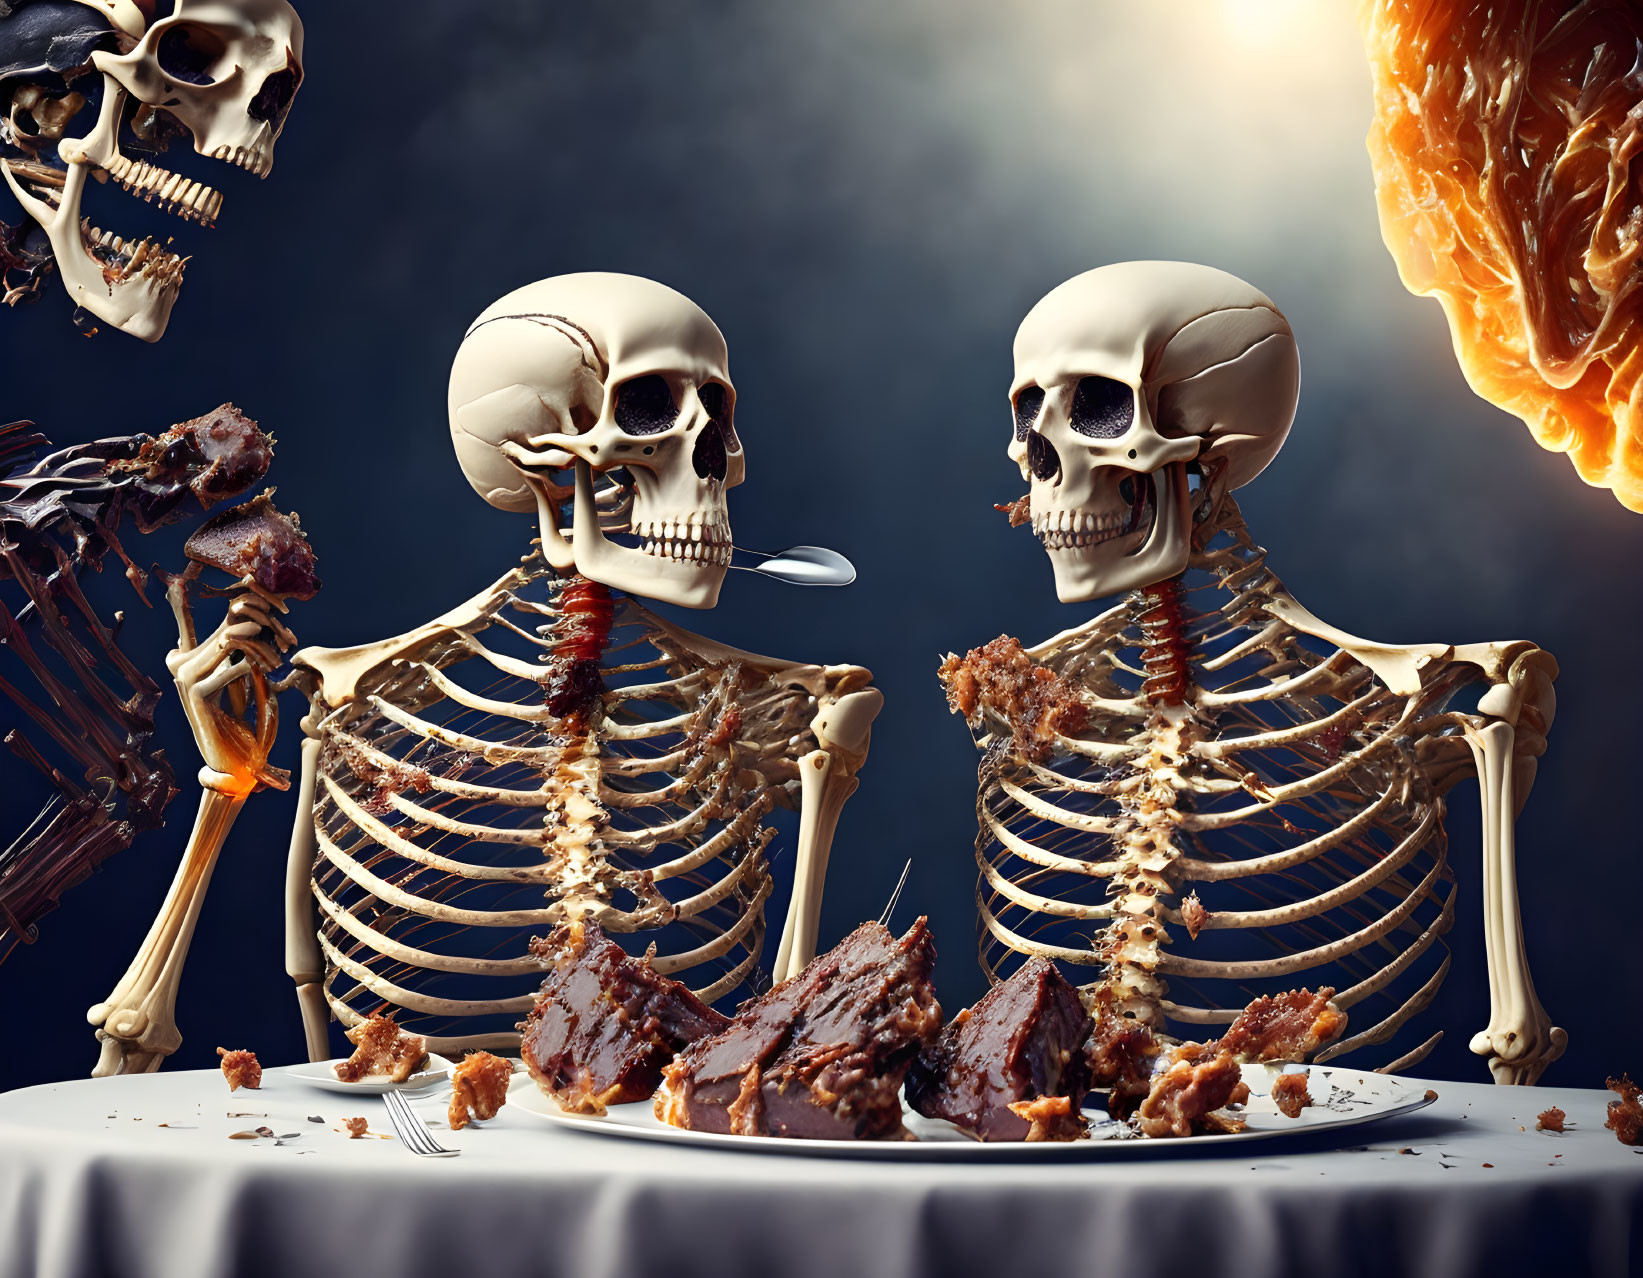 Skeletons dining at a table with fiery backdrop